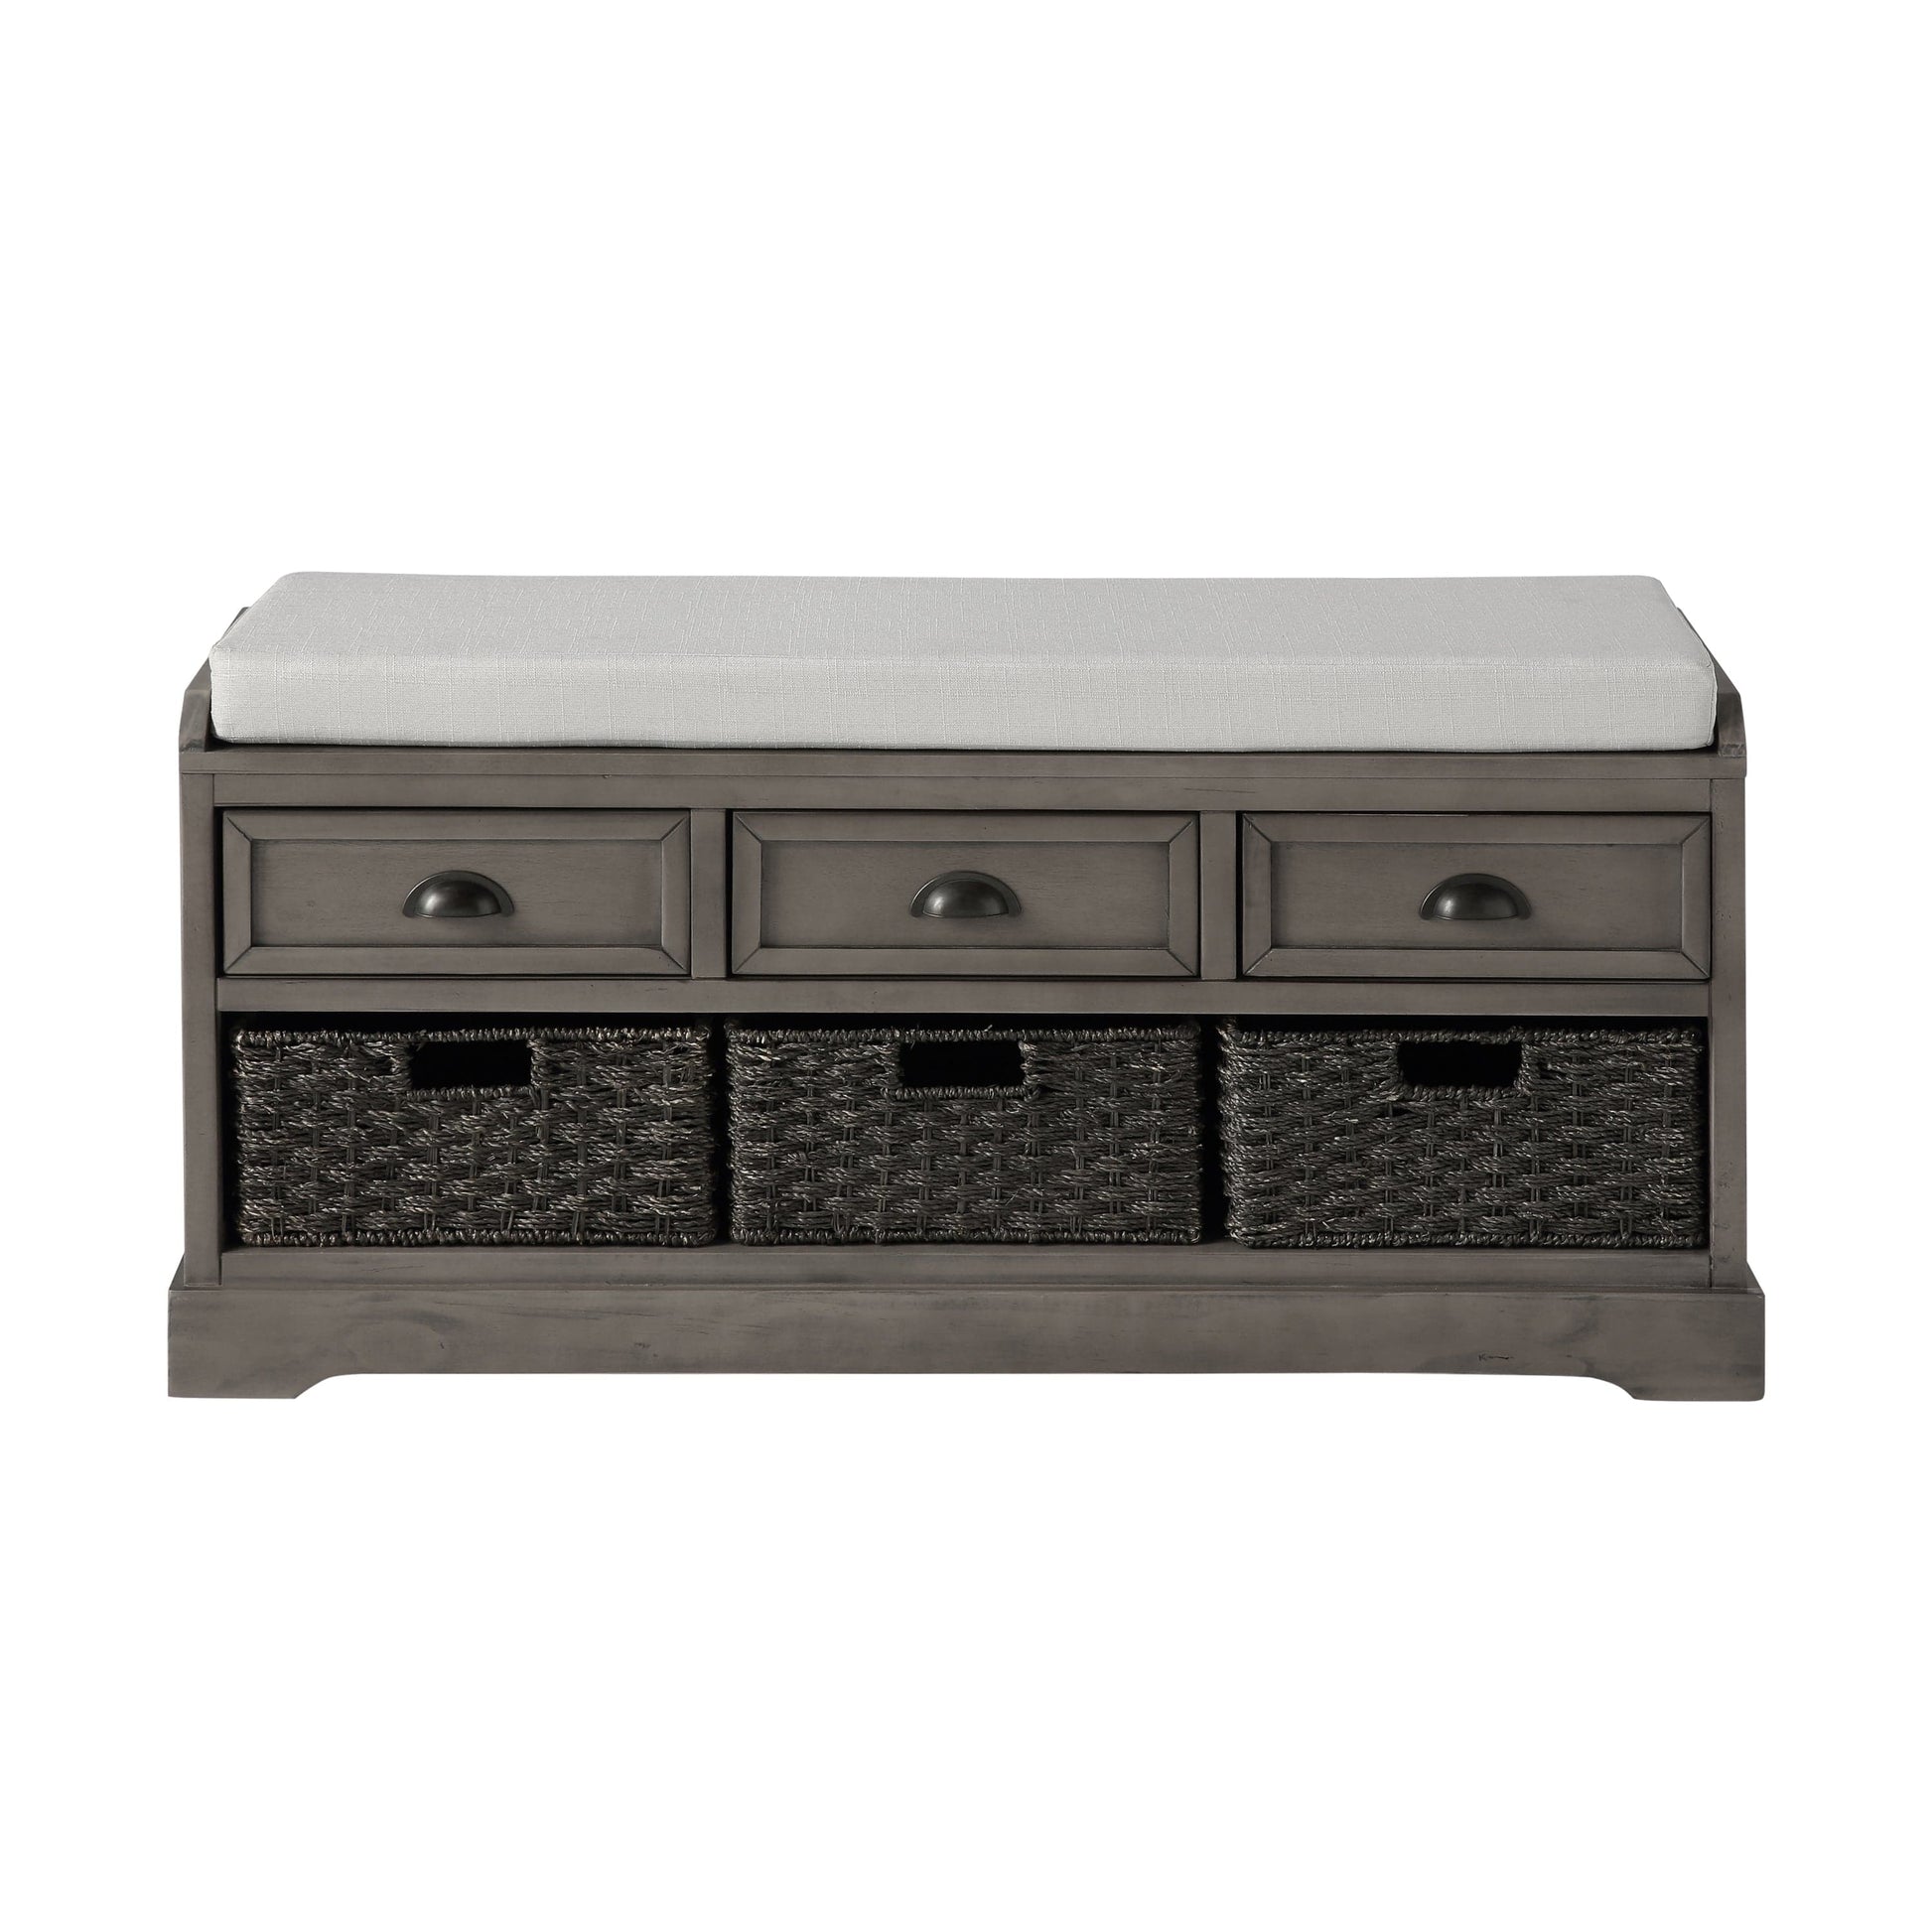 1st Choice Furniture Direct Bench with Storage 1st Choice Industrial Wooden Storage Bench with 3 Drawers & Baskets